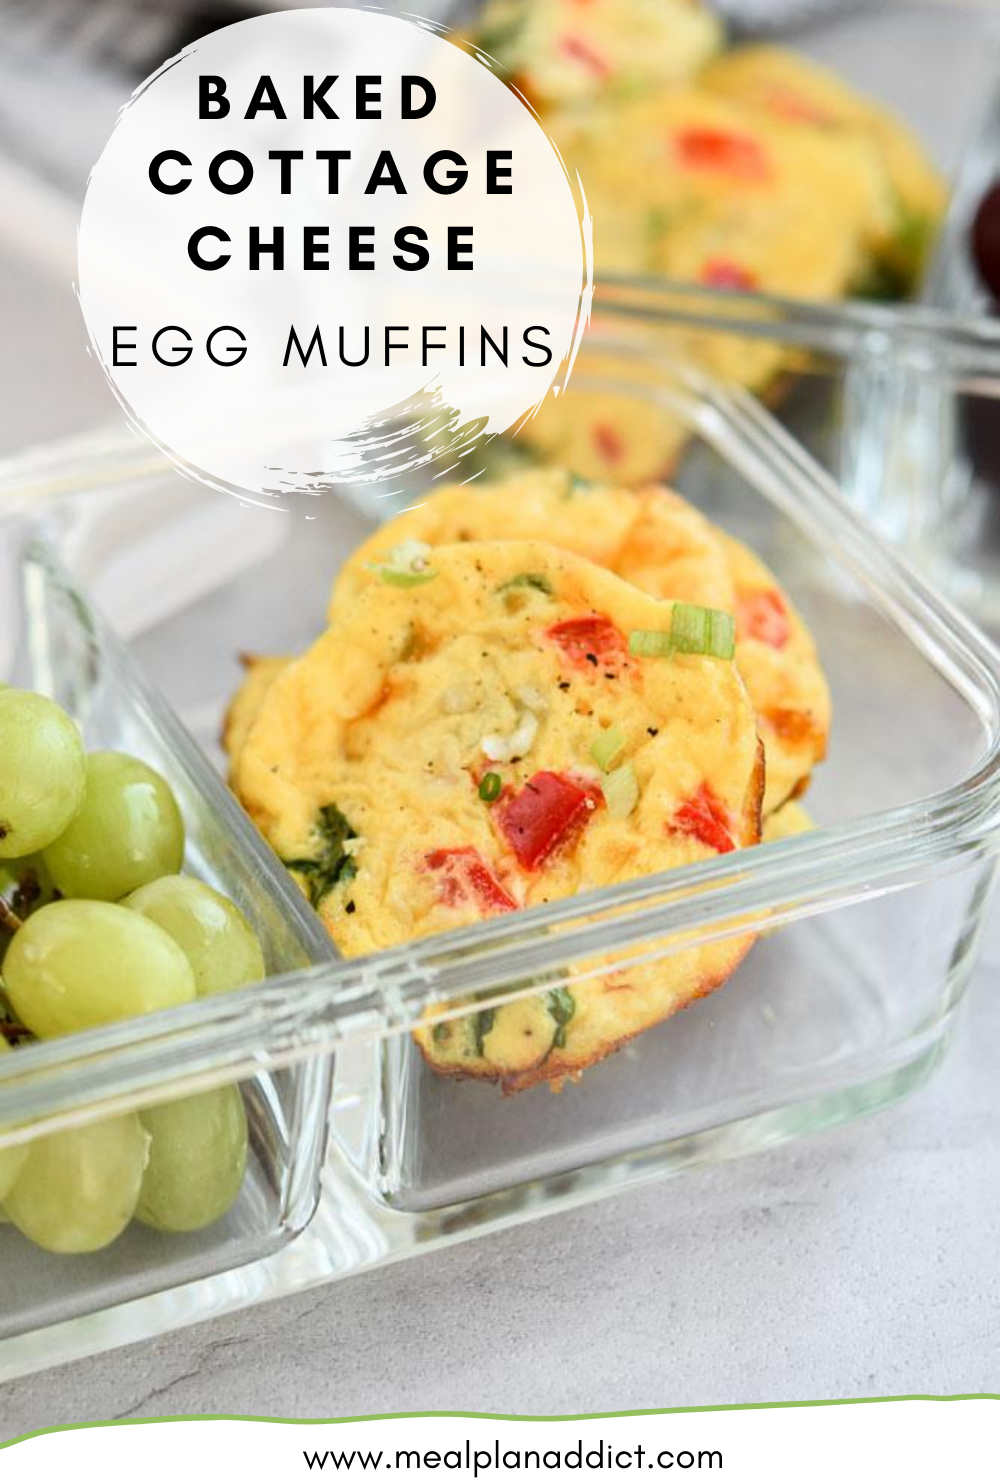 Baked Cottage Cheese Egg Muffins